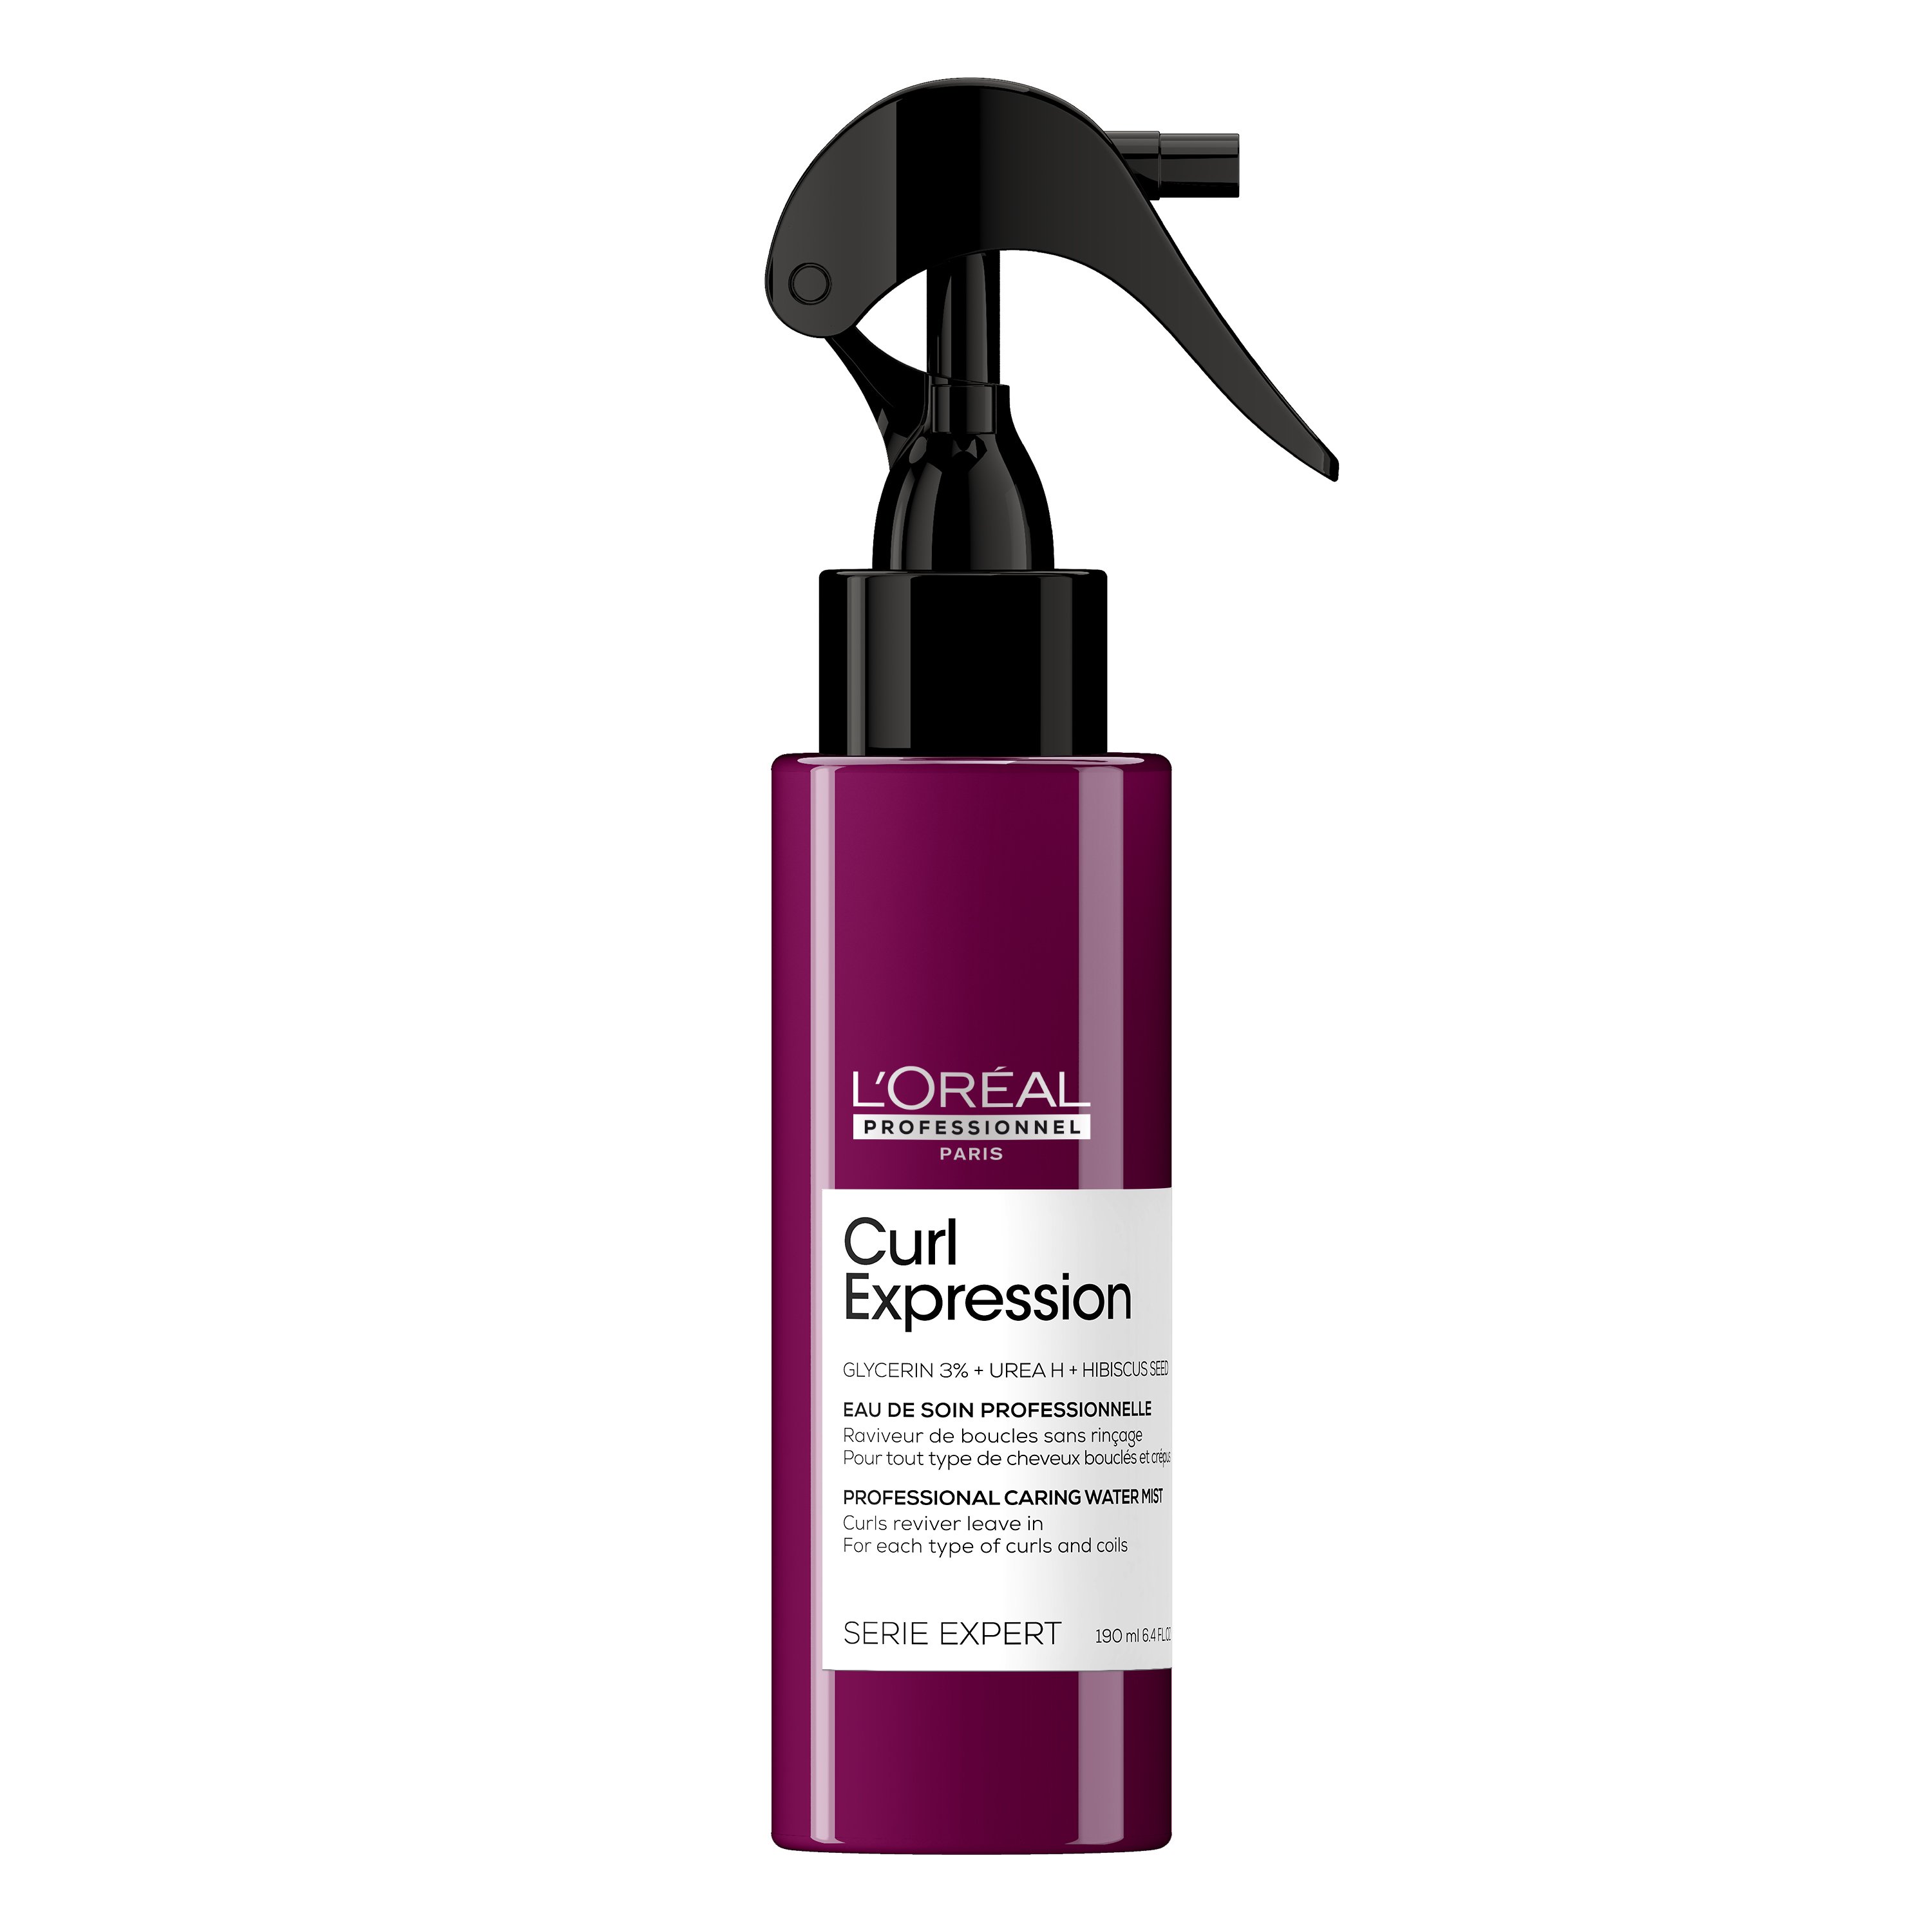 L OREAL SERIE EXPERT CURL EXPRESSION PROFESSIONAL CARING WATER